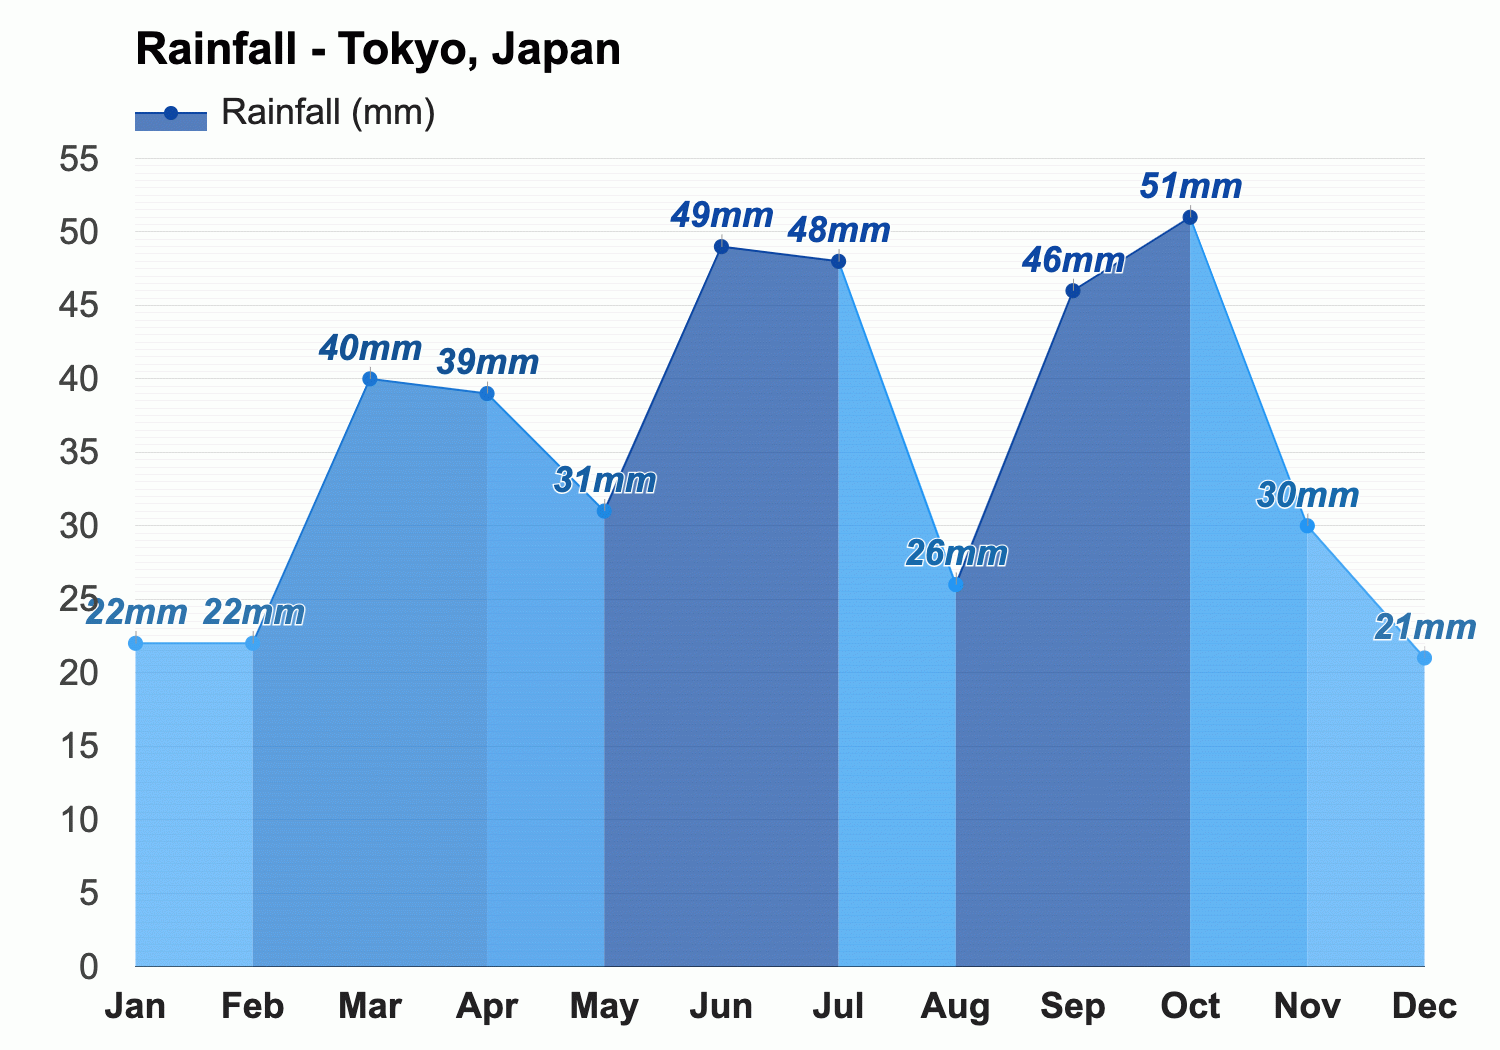 Climate & Weather Averages in Tokyo - PLAZA HOMES